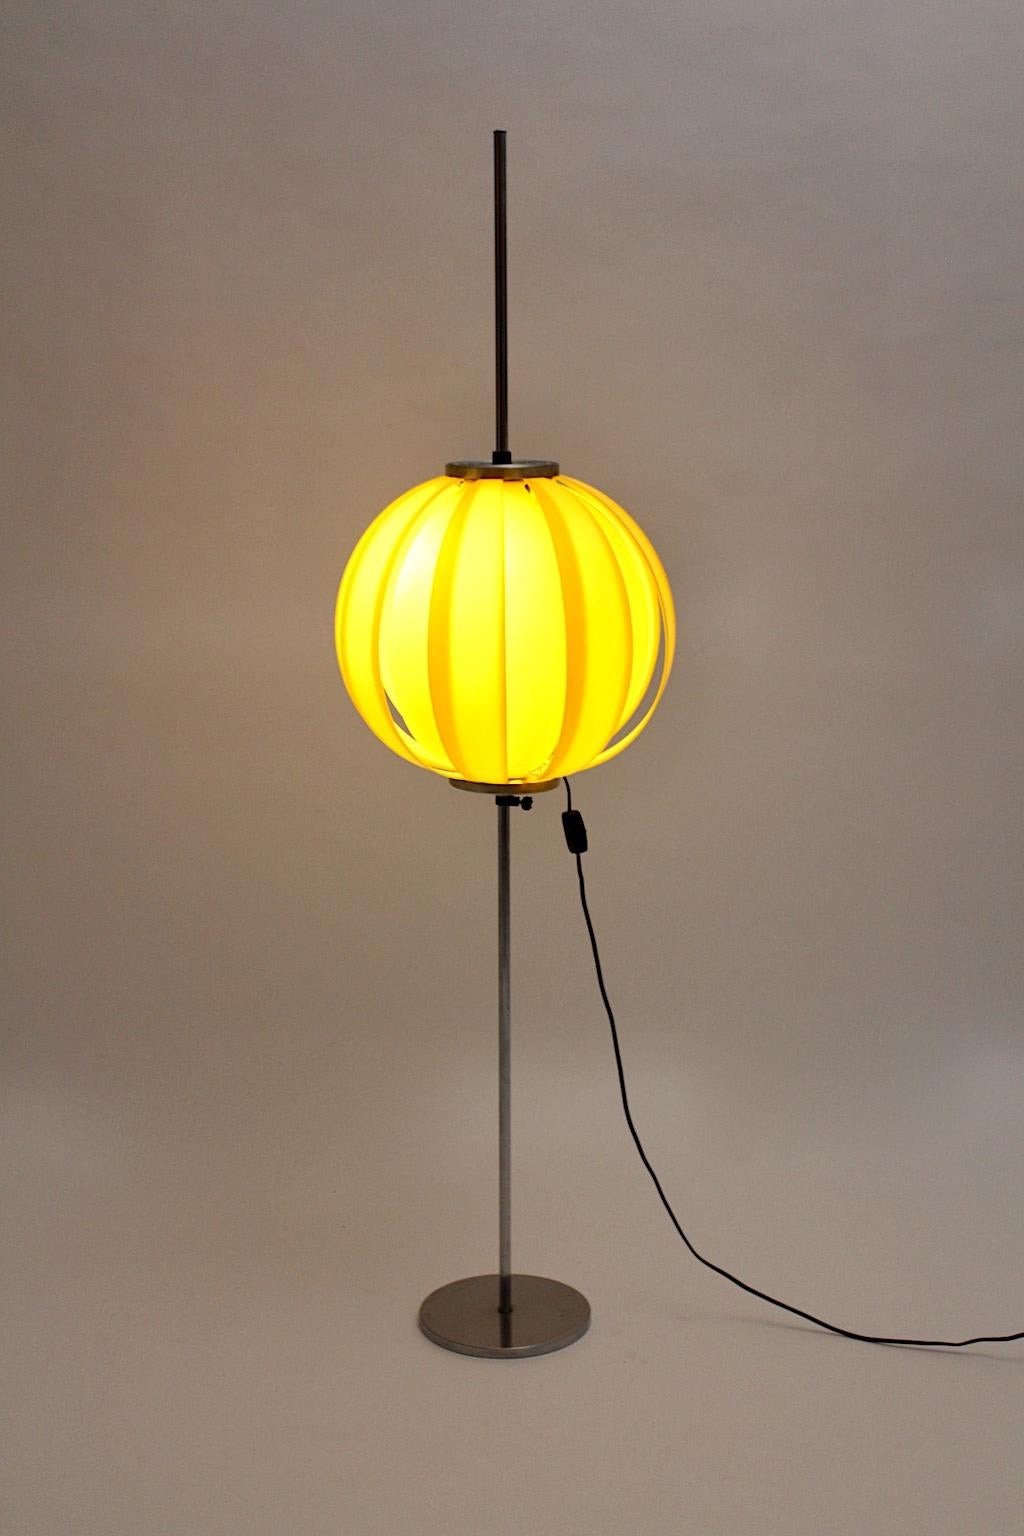 Space Age Pop Art Yellow Vintage Plastic Ball Floor Lamp, 1960s For Sale